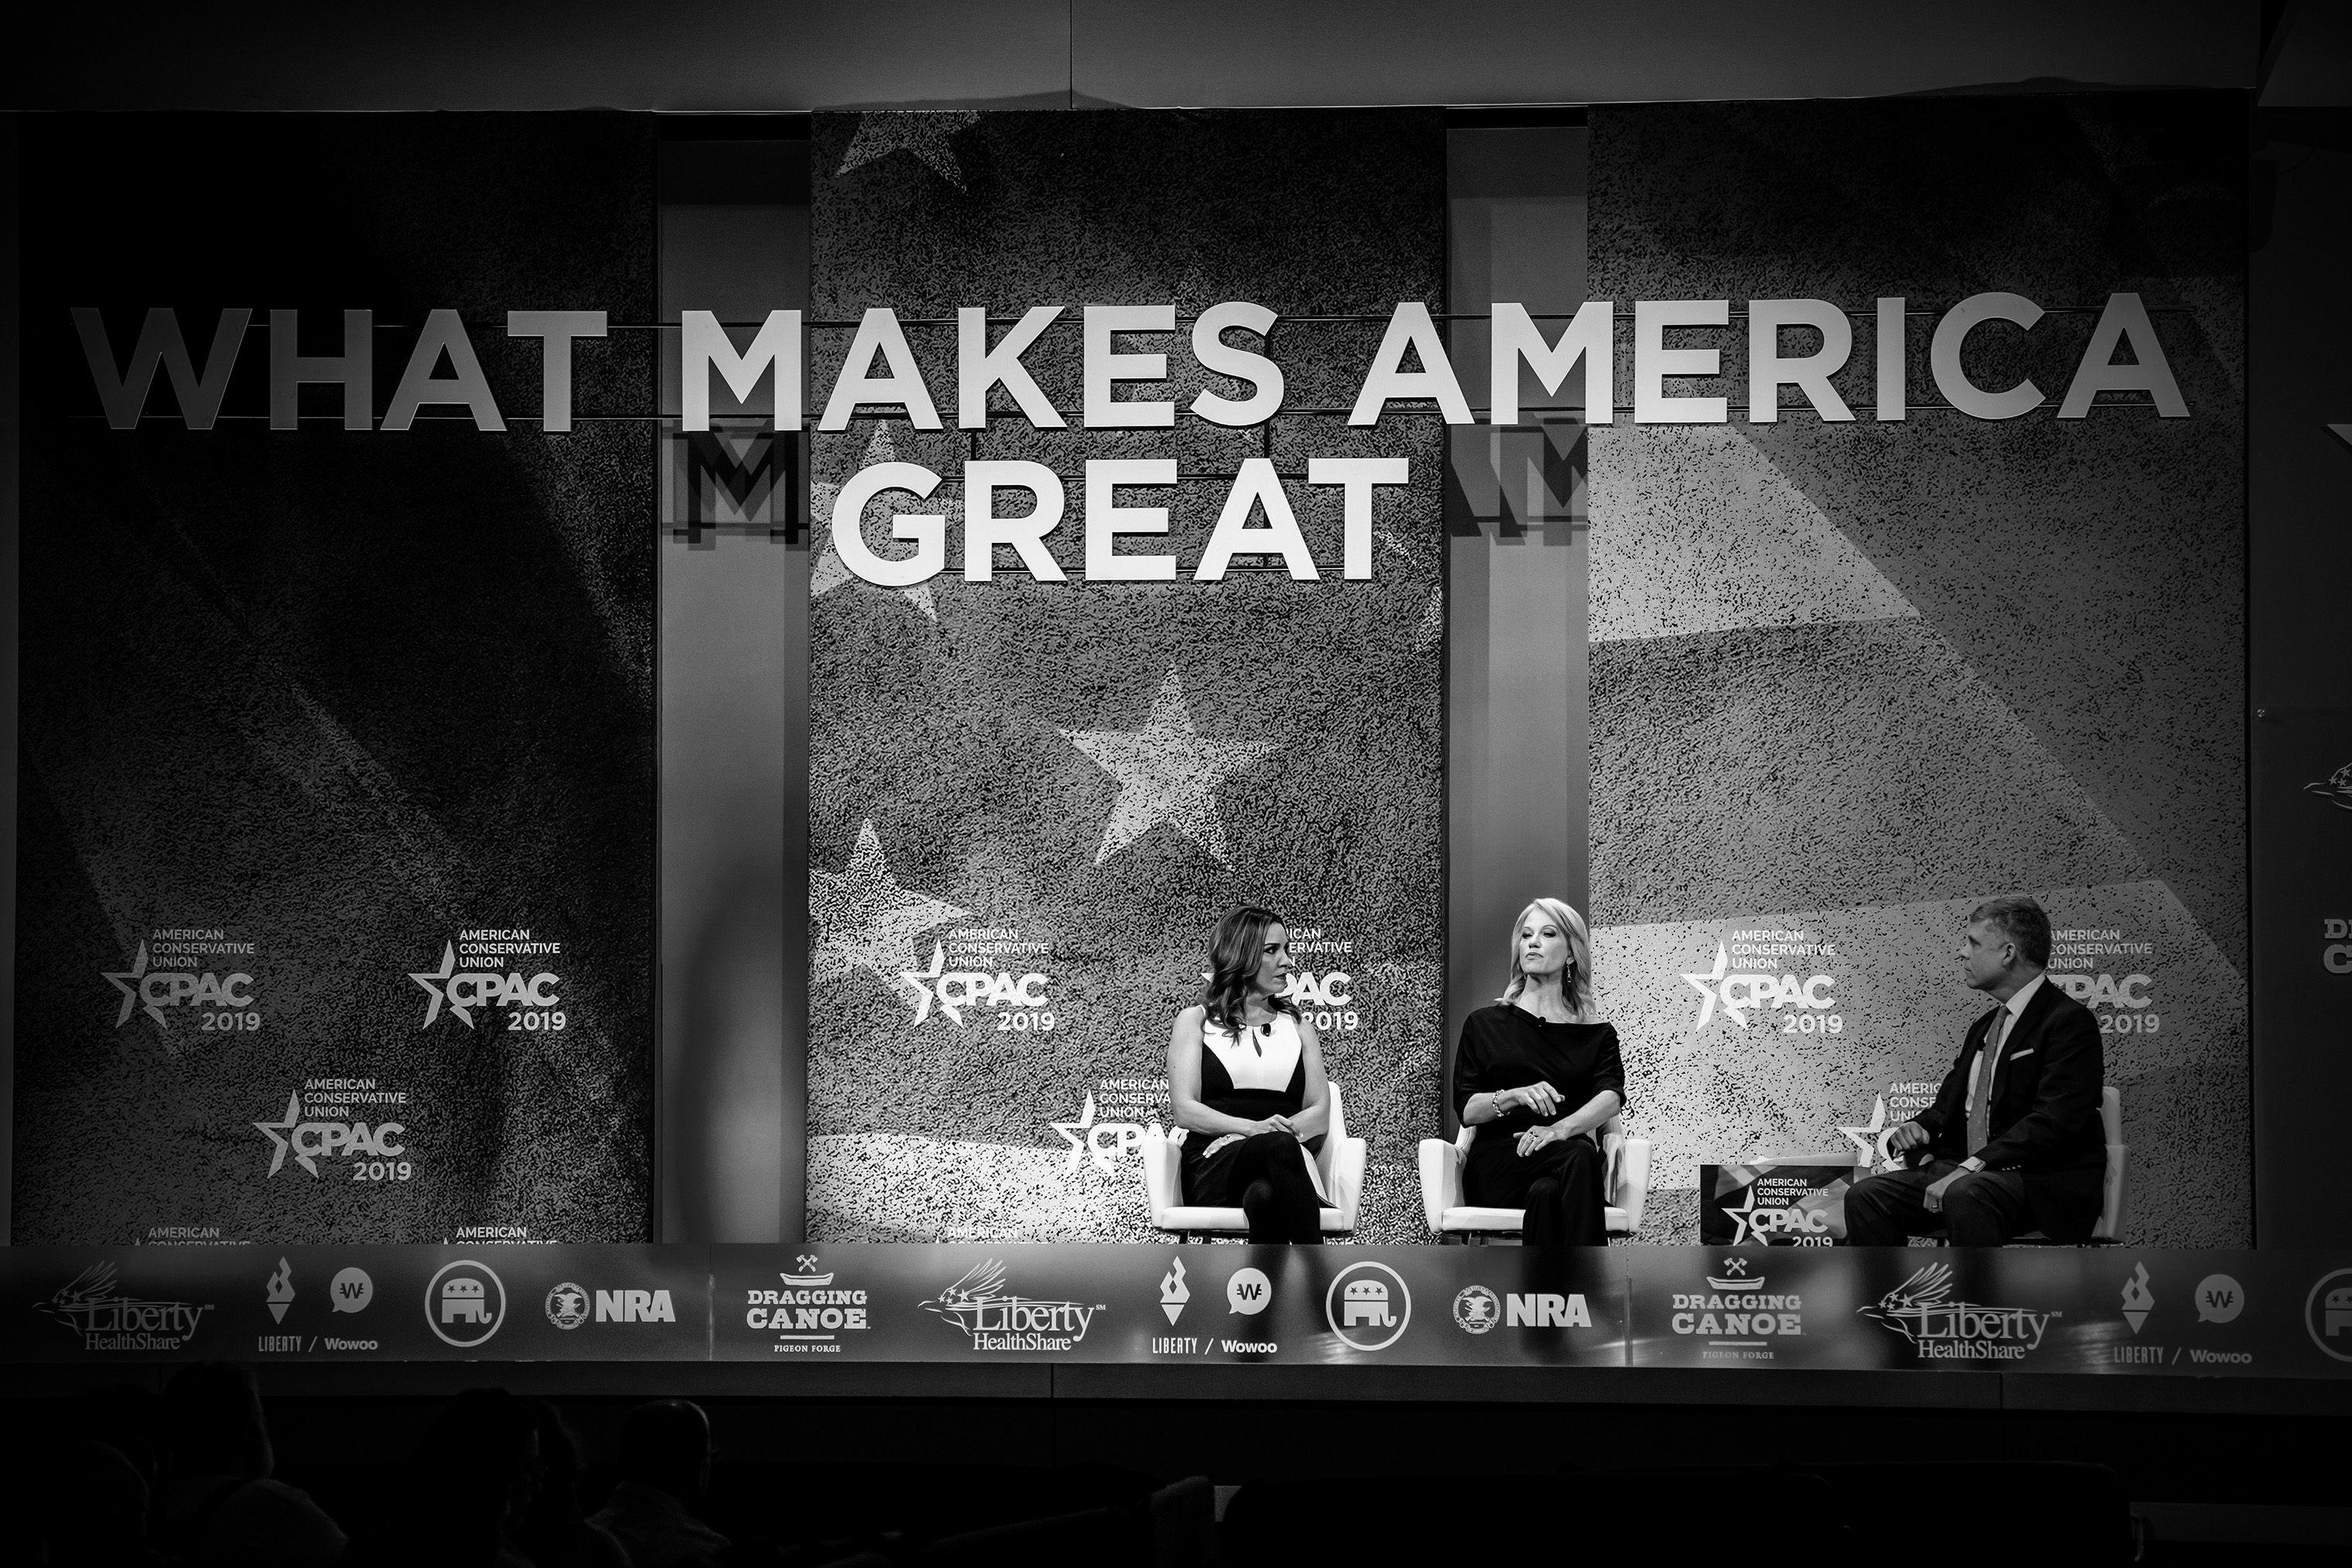 Fox News' Sara Carter and Kellyanne Conway are interviewed by Scott Walter. (Mark Peterson—Redux for TIME)